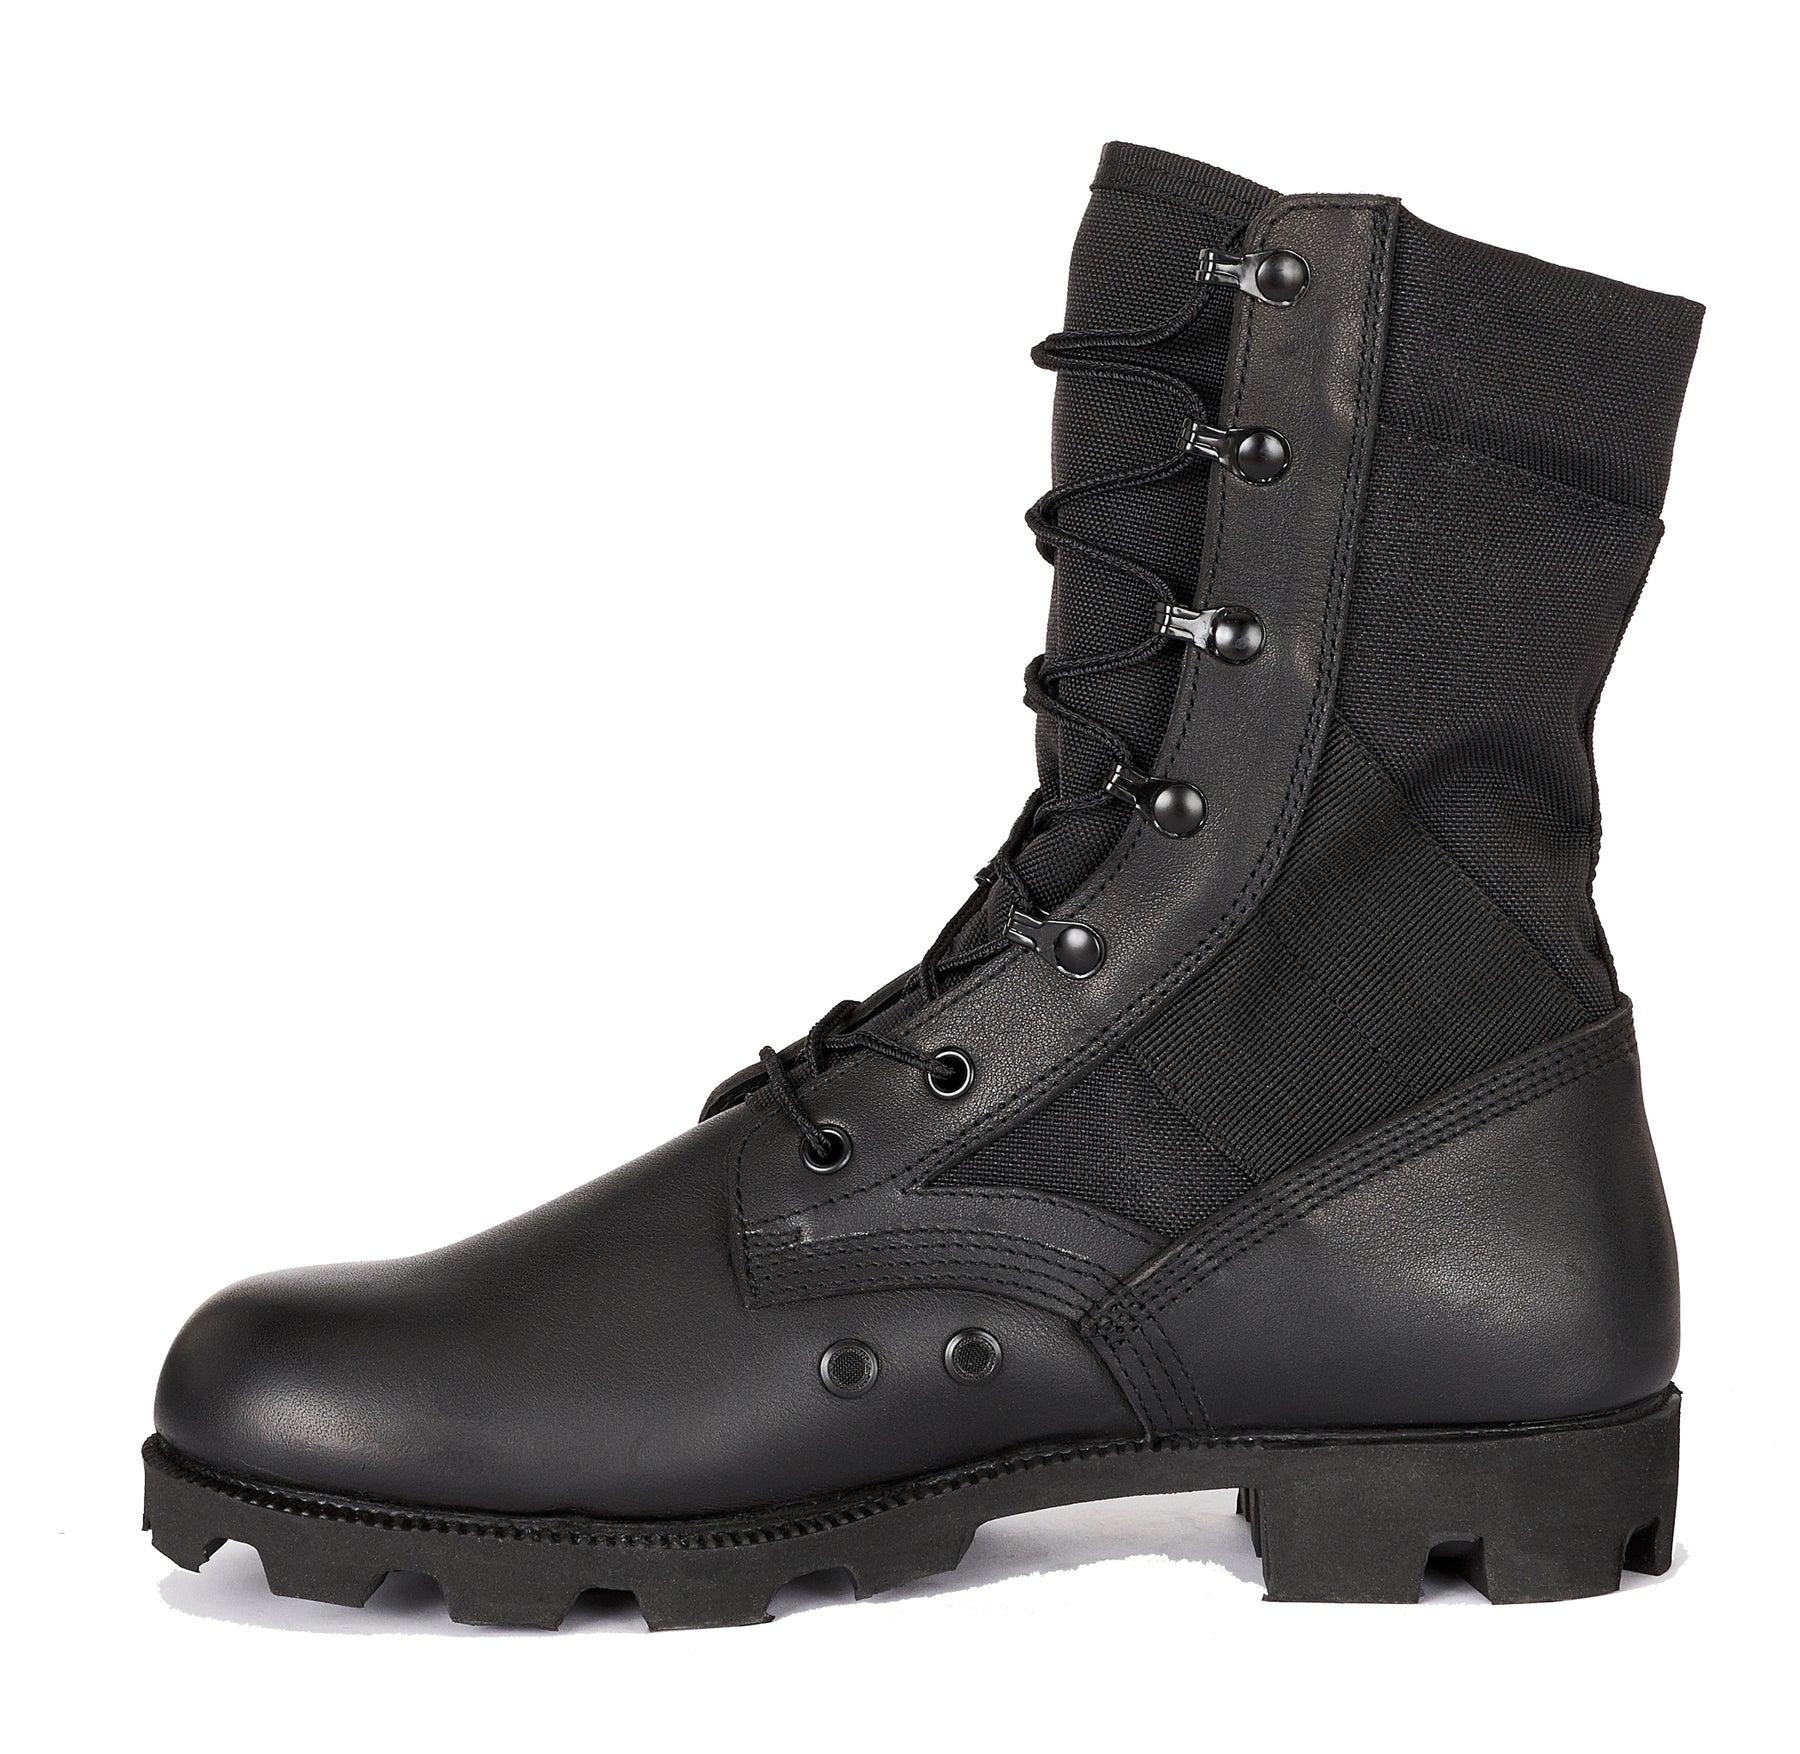 Belleville Canopy Jungle Boot - BV903PR Military Boots